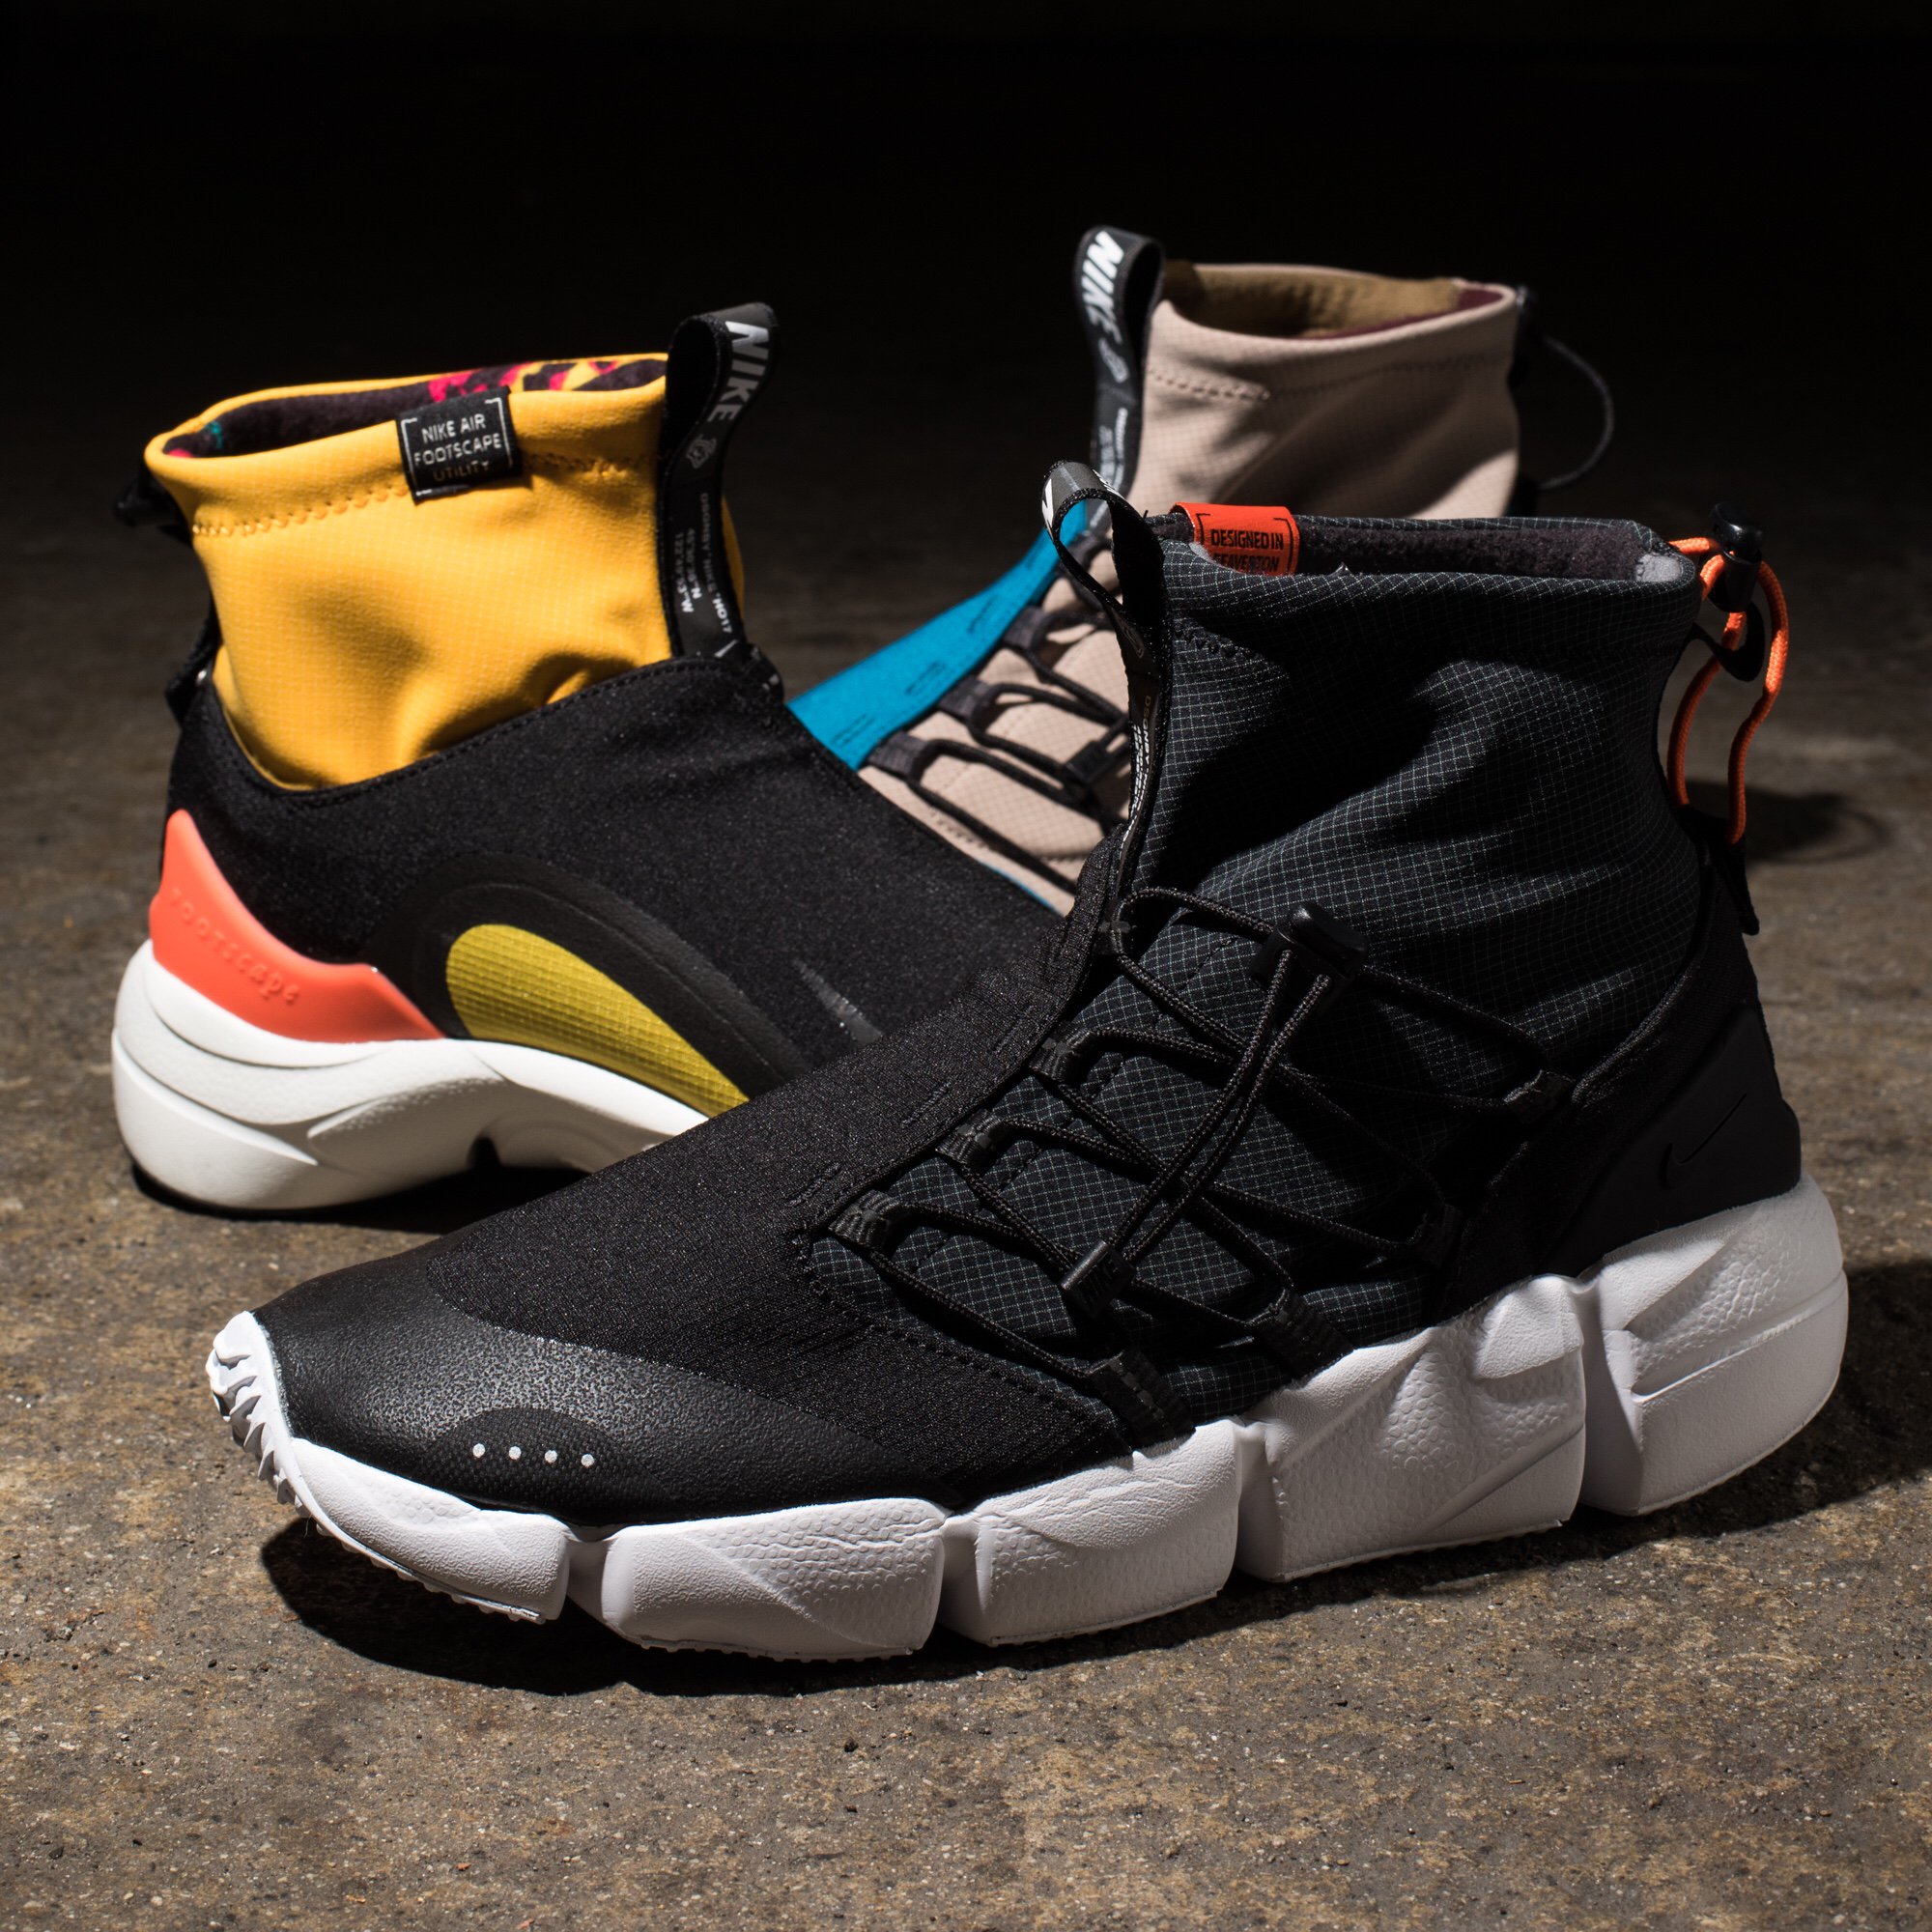 Hostal Microprocesador Resbaladizo UNDEFEATED on Twitter: "Nike Air Footscape Mid Utility DM // Available now  at Select Undefeated Chapter Stores and https://t.co/rPhV7ZxrNE  https://t.co/ToqcJjt5Vx" / Twitter